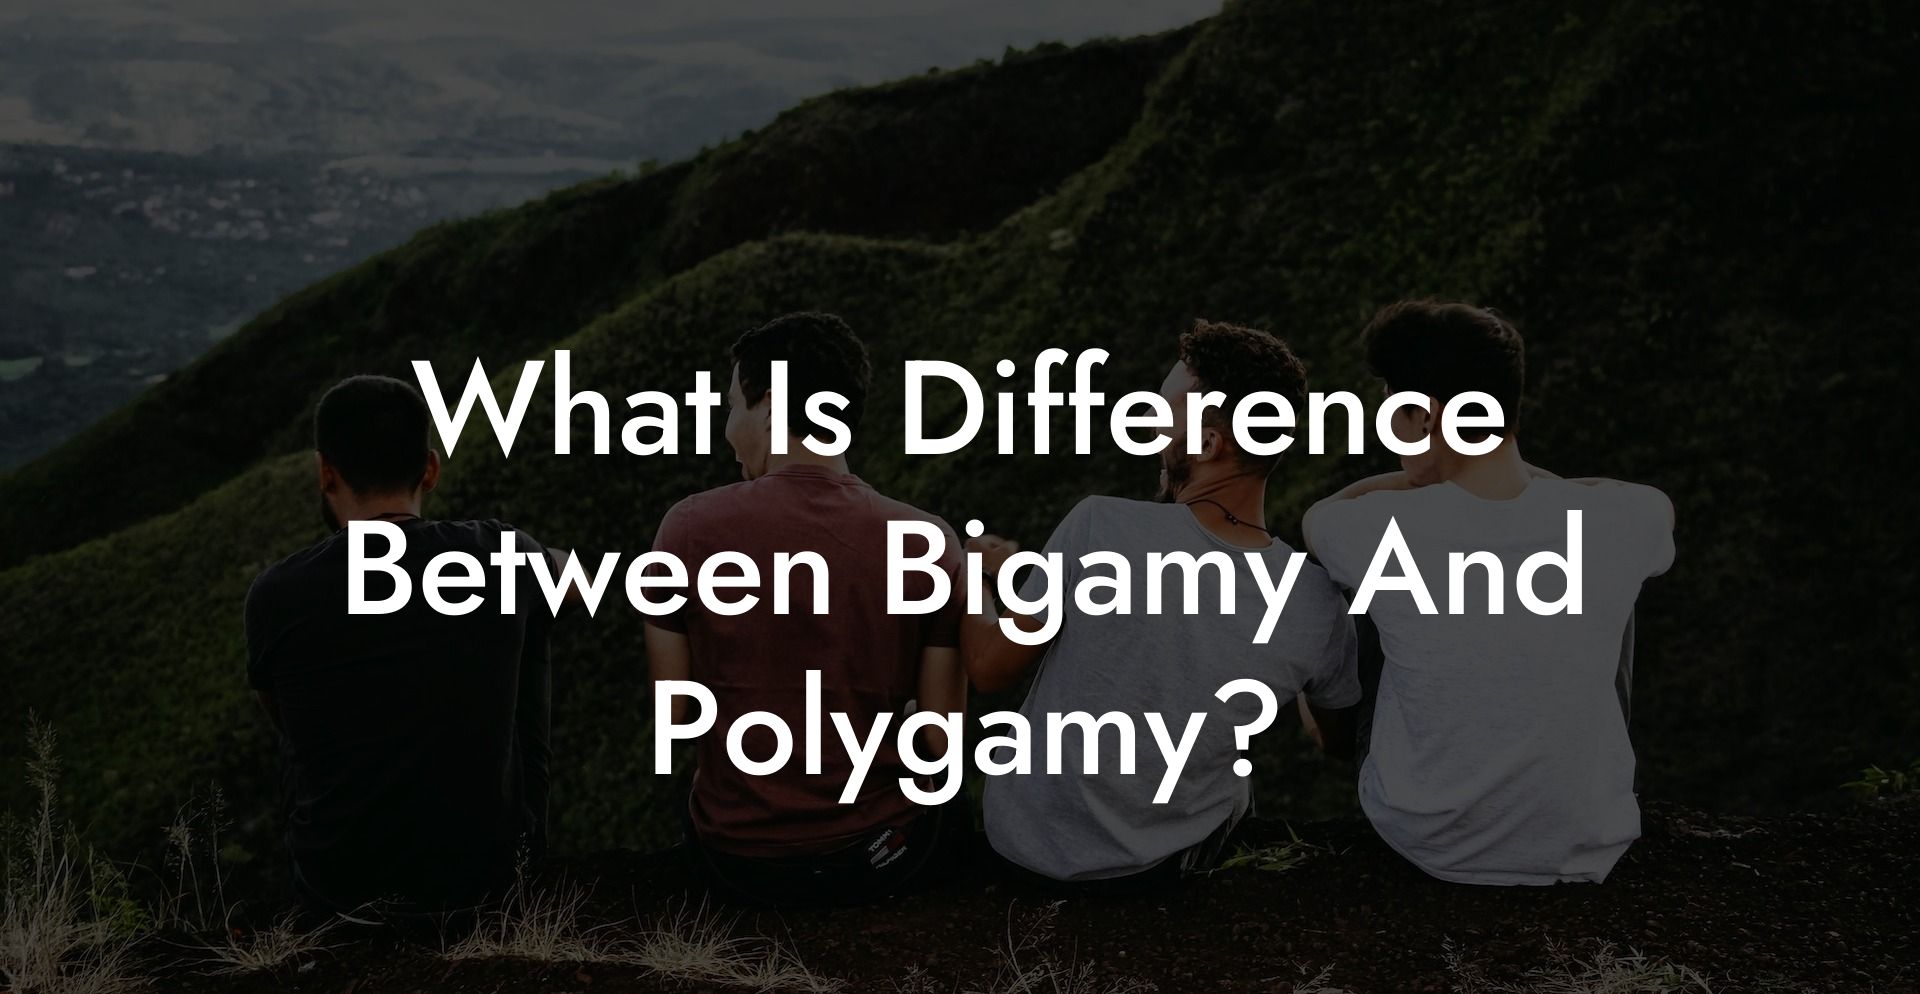 What Is Difference Between Bigamy And Polygamy?